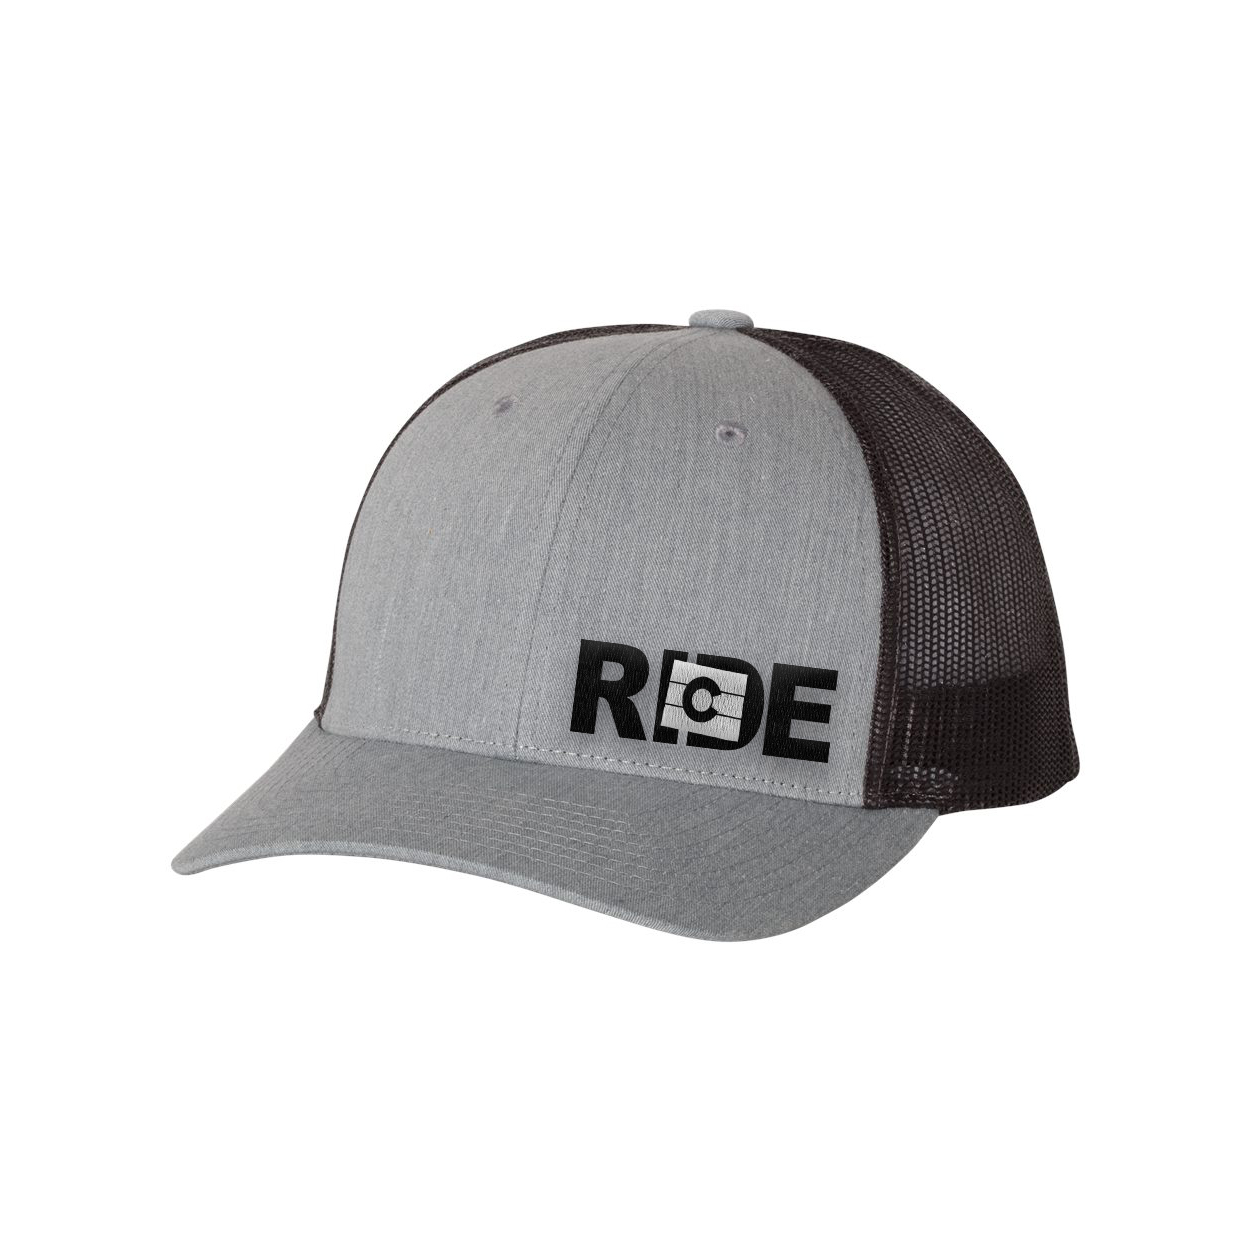 Ride Colorado Night Out Embroidered Snapback Trucker Hat Heather Gray/Black